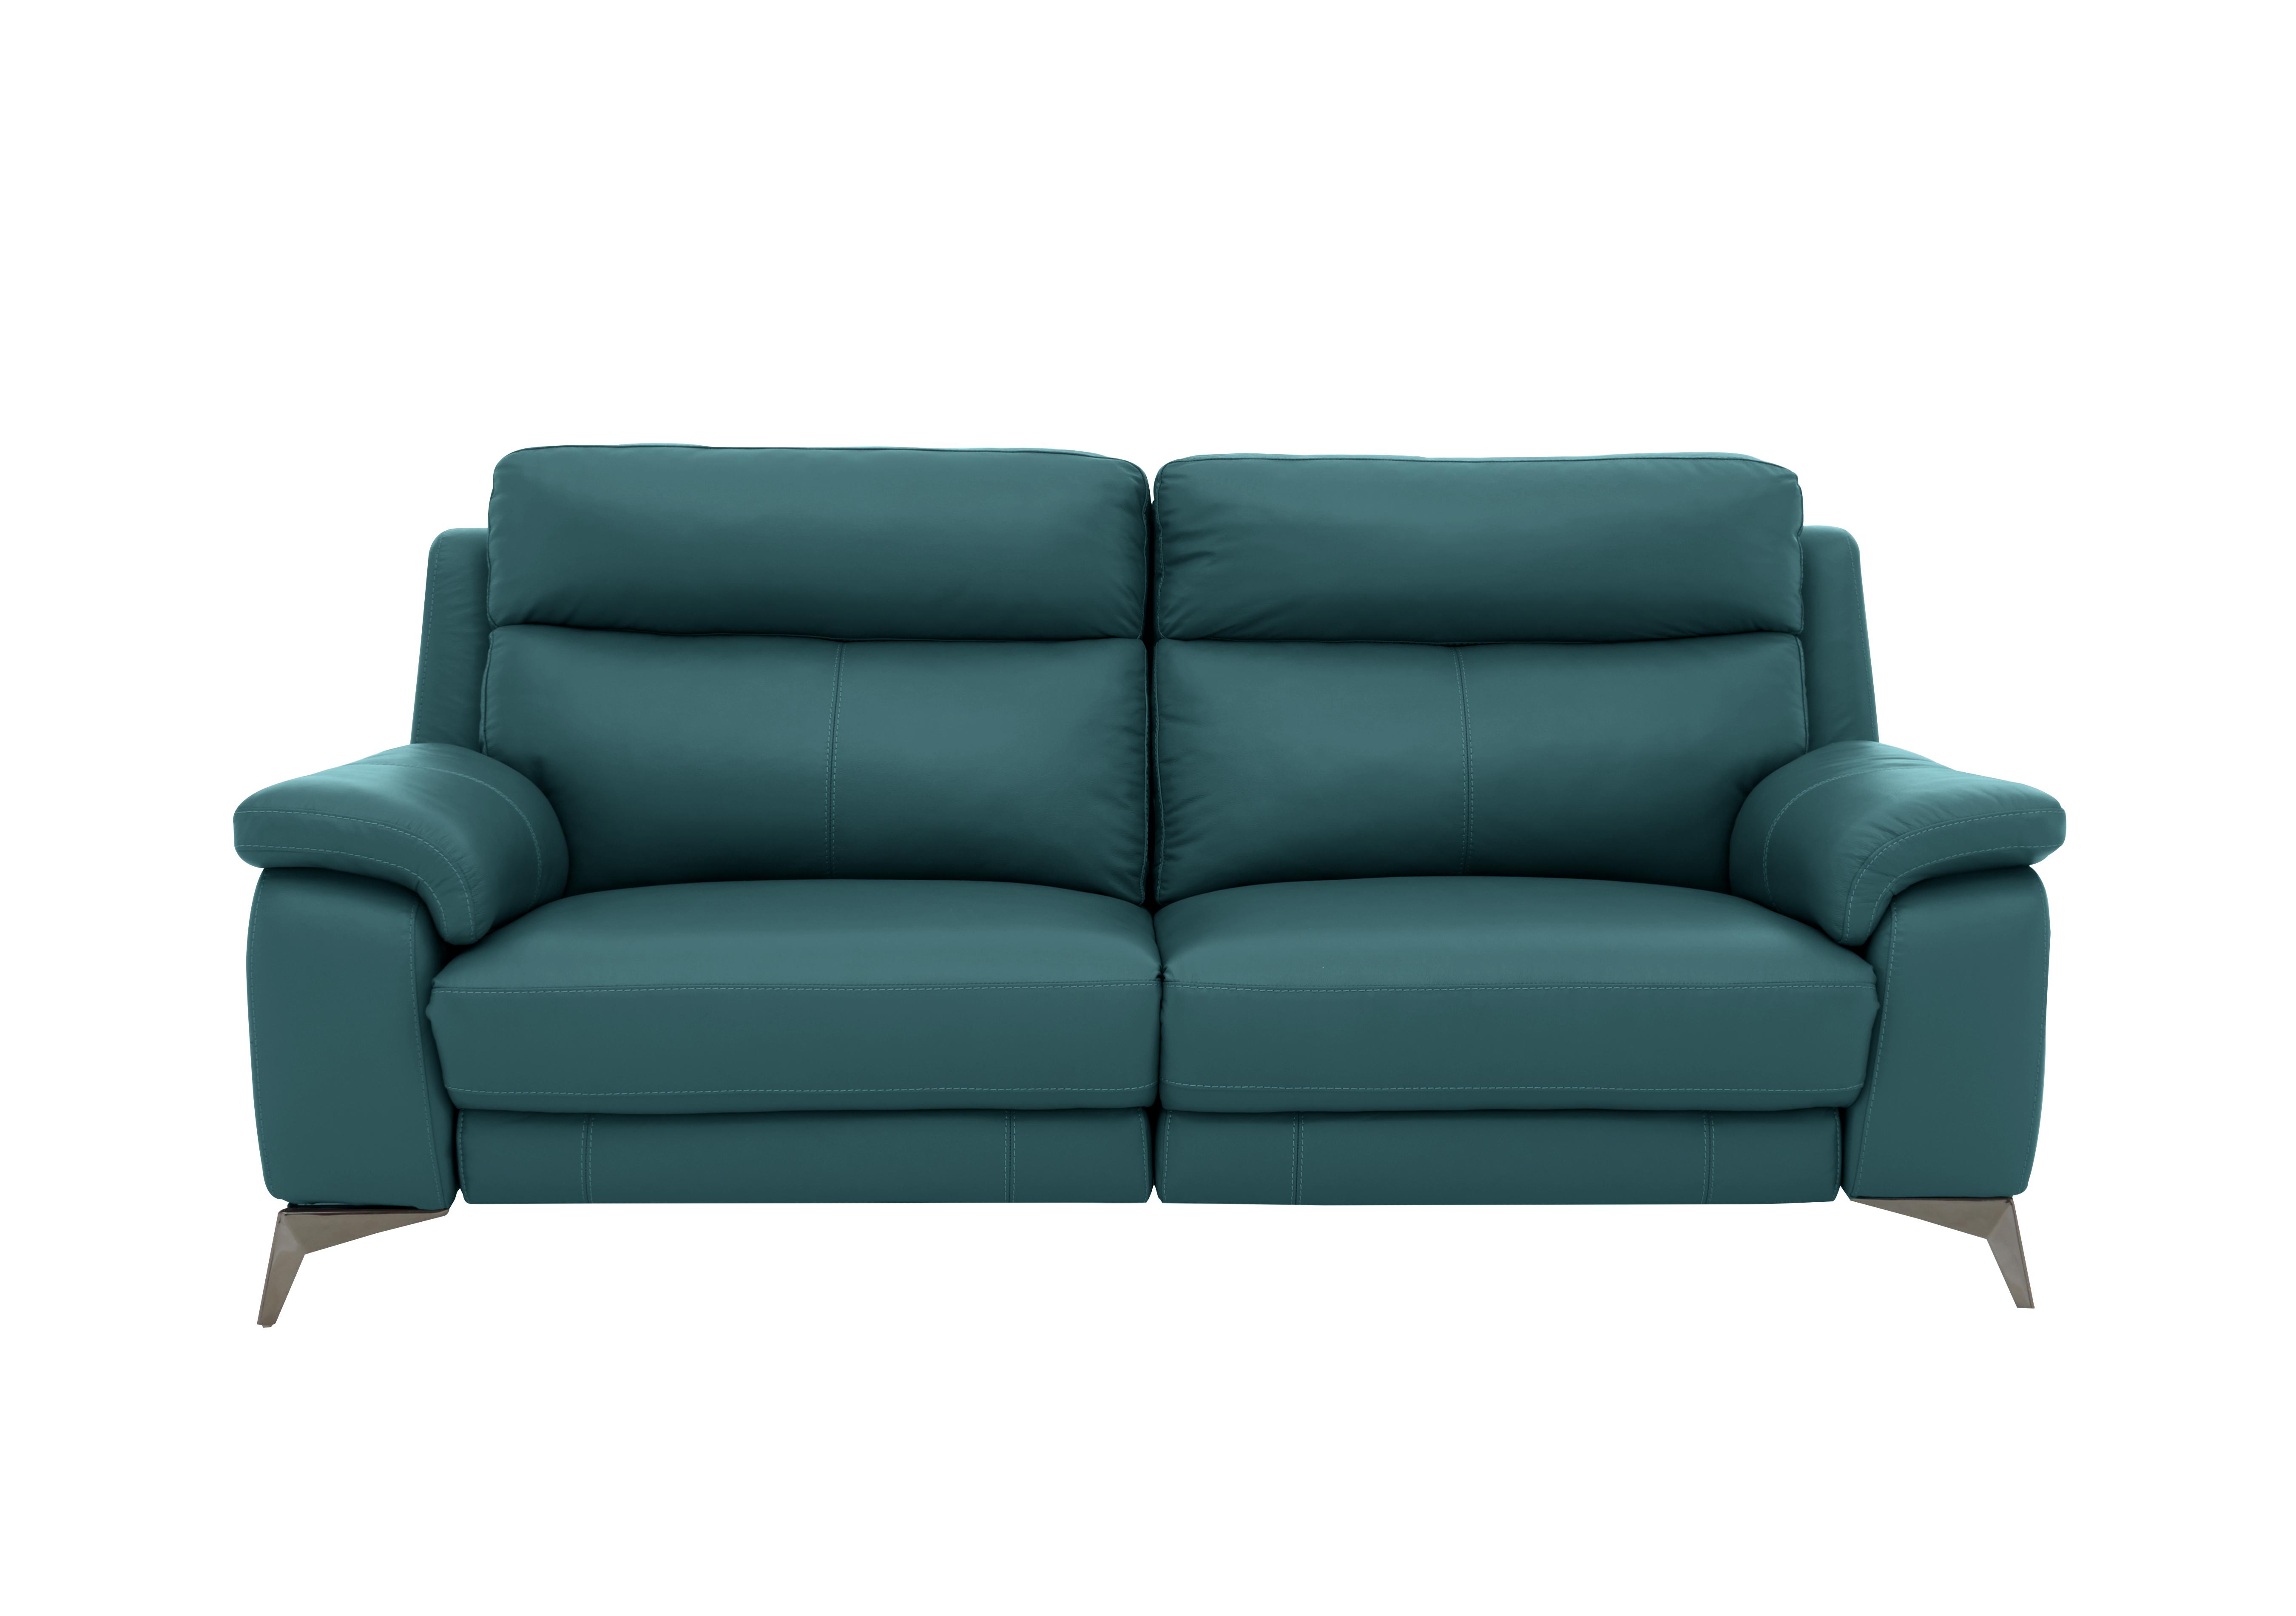 Missouri 3 Seater Leather Recliner Sofa with Power Headrest in Bv-301e Lake Green on Furniture Village